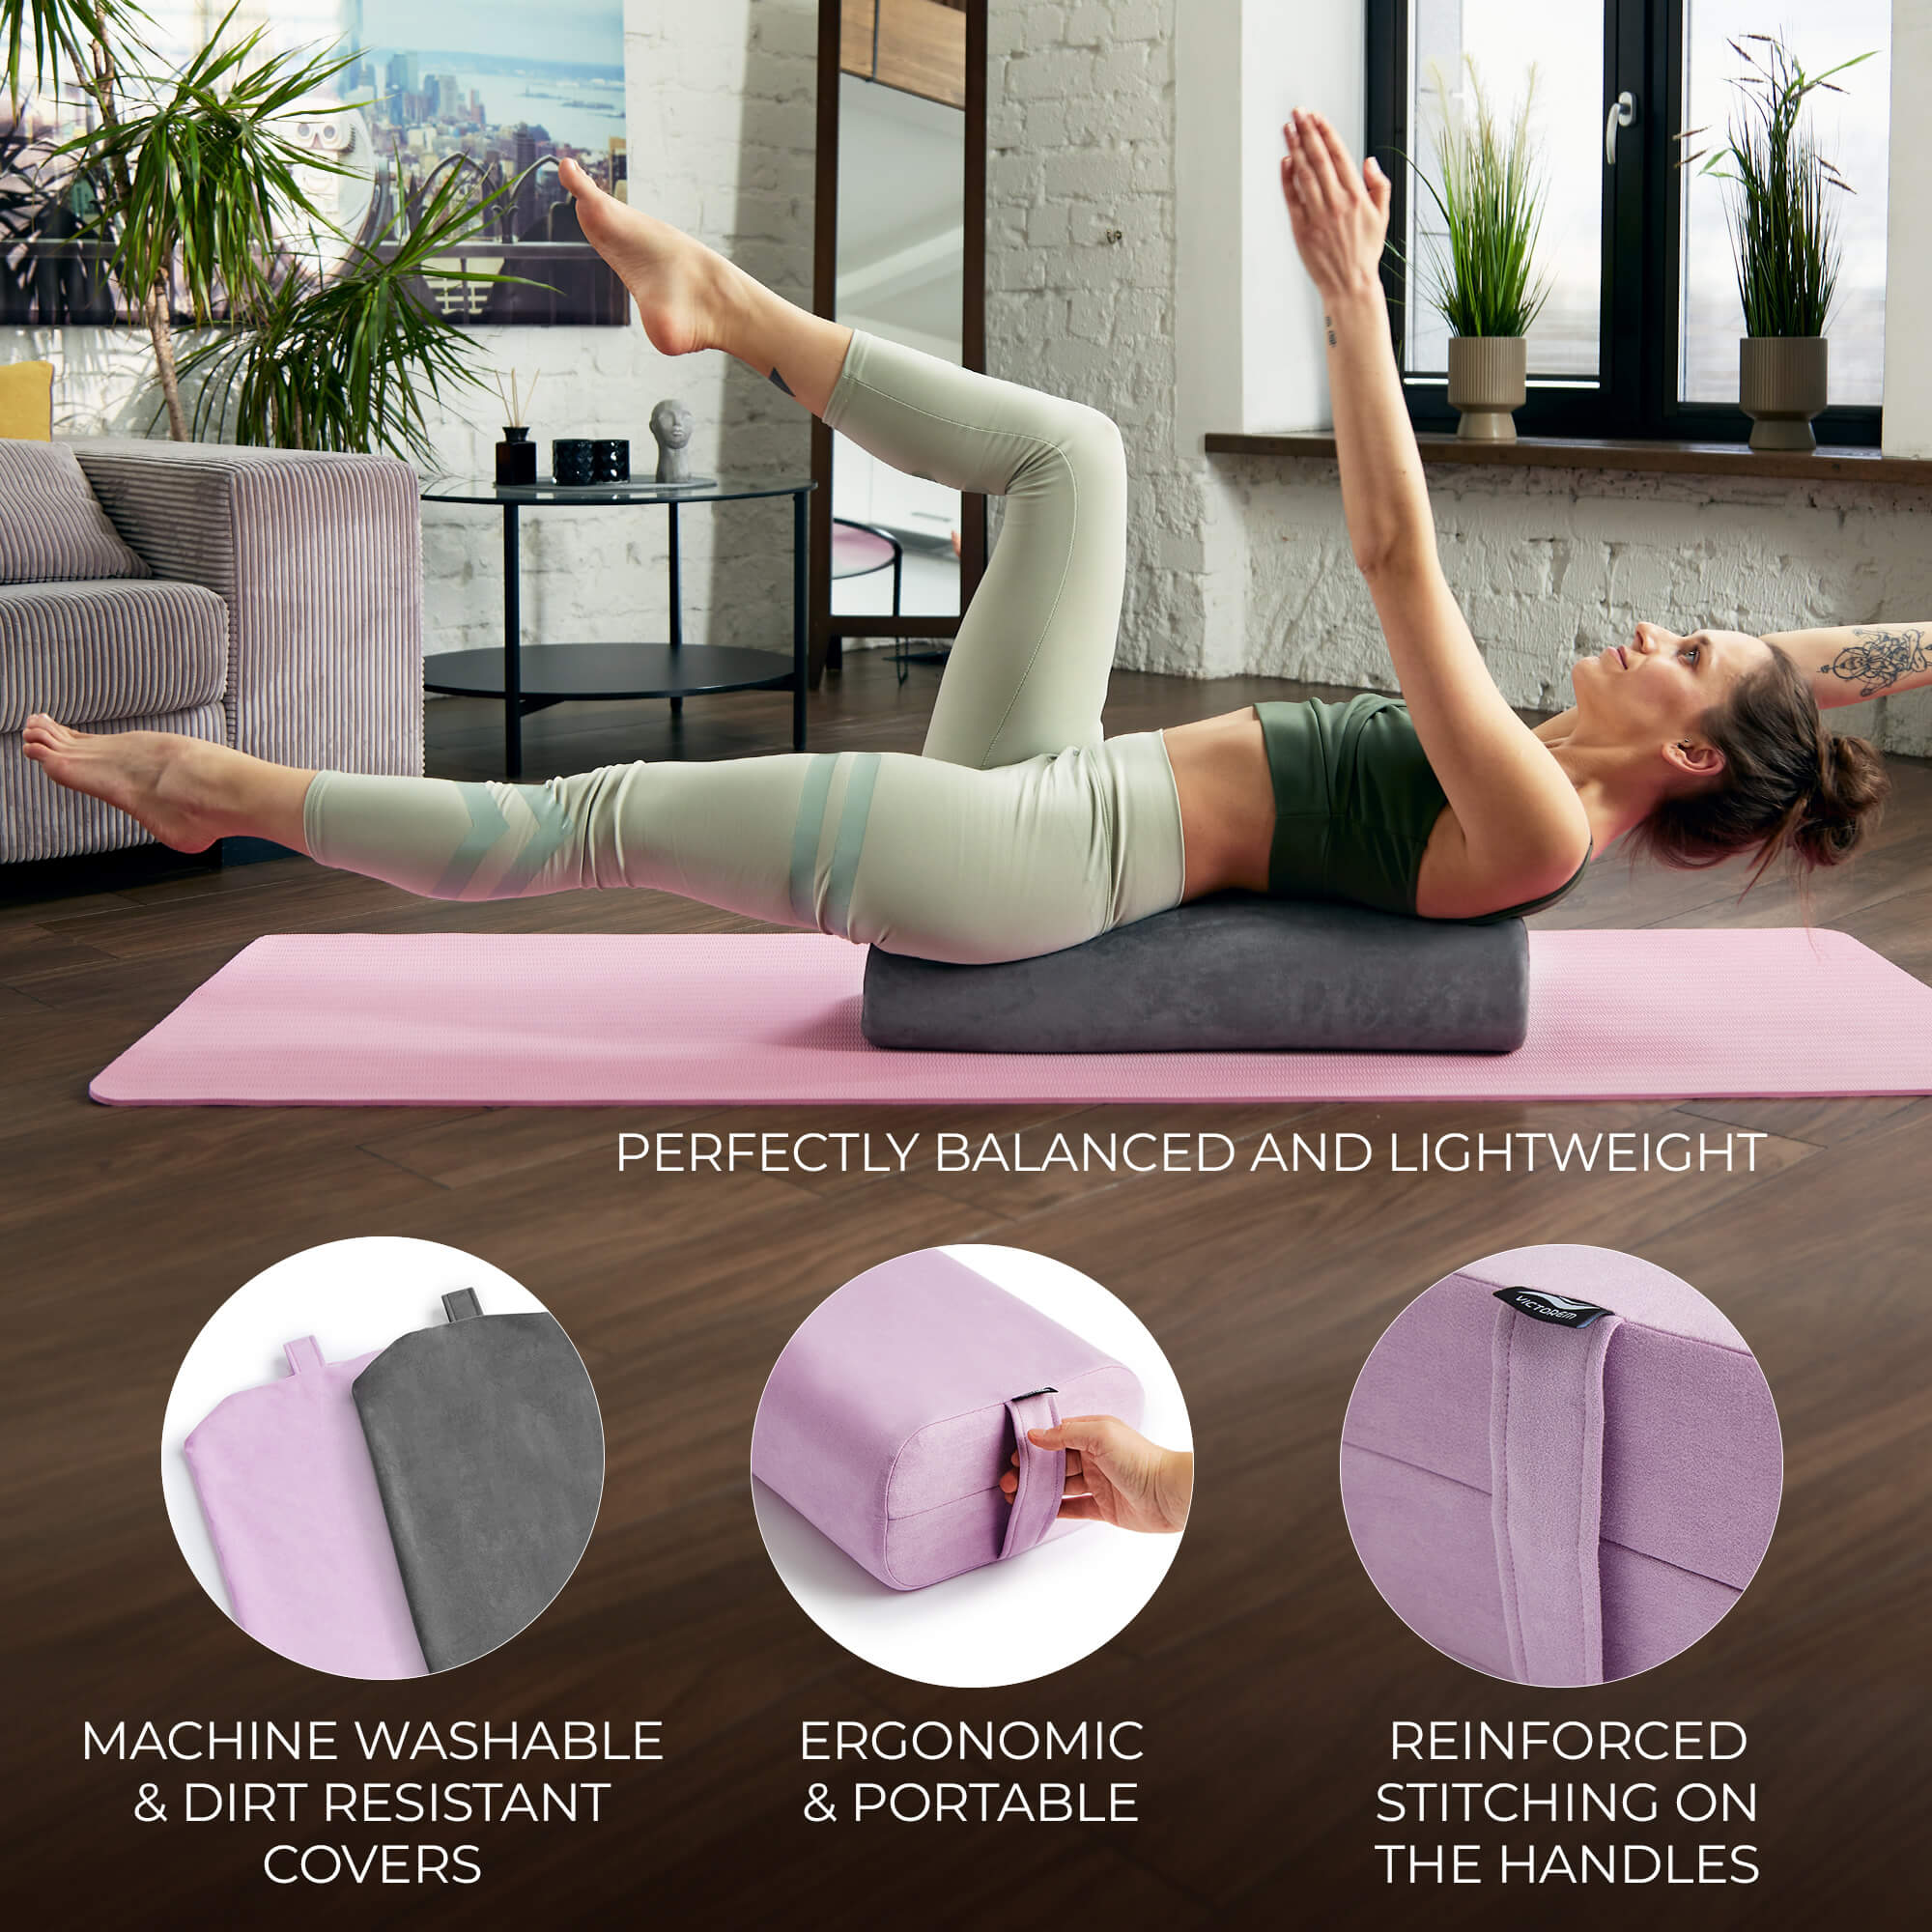 How to Use a Yoga Bolster  Inner Space Yoga & Meditation Supplies